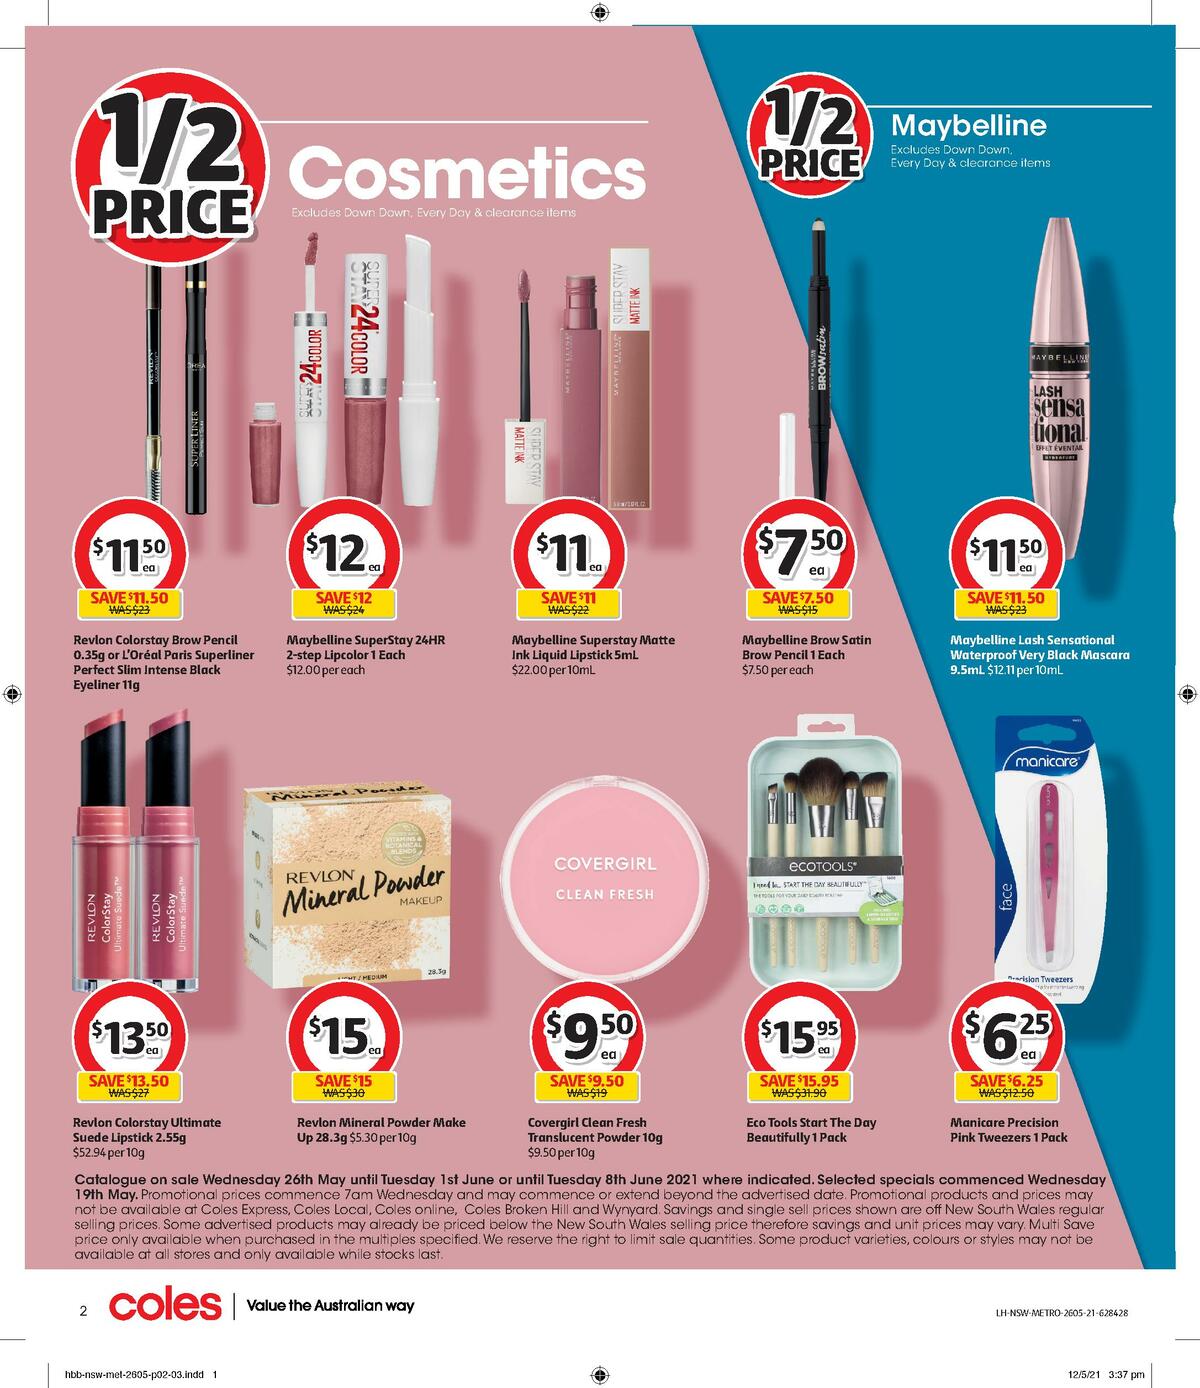 Coles Health & Beauty Catalogues from 26 May